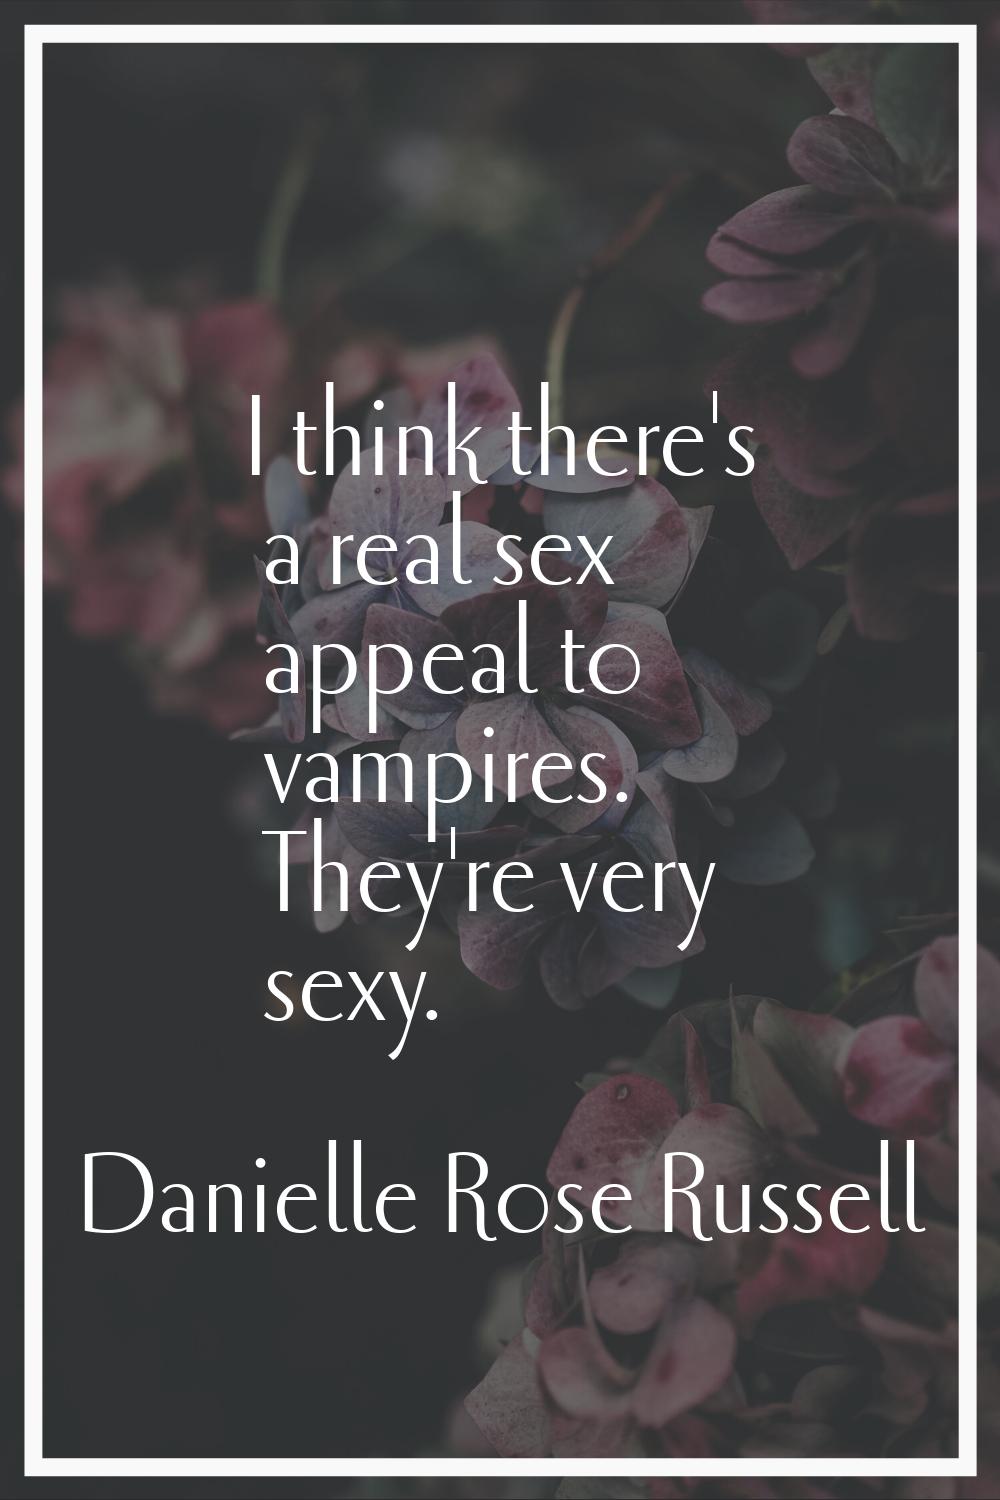 I think there's a real sex appeal to vampires. They're very sexy.